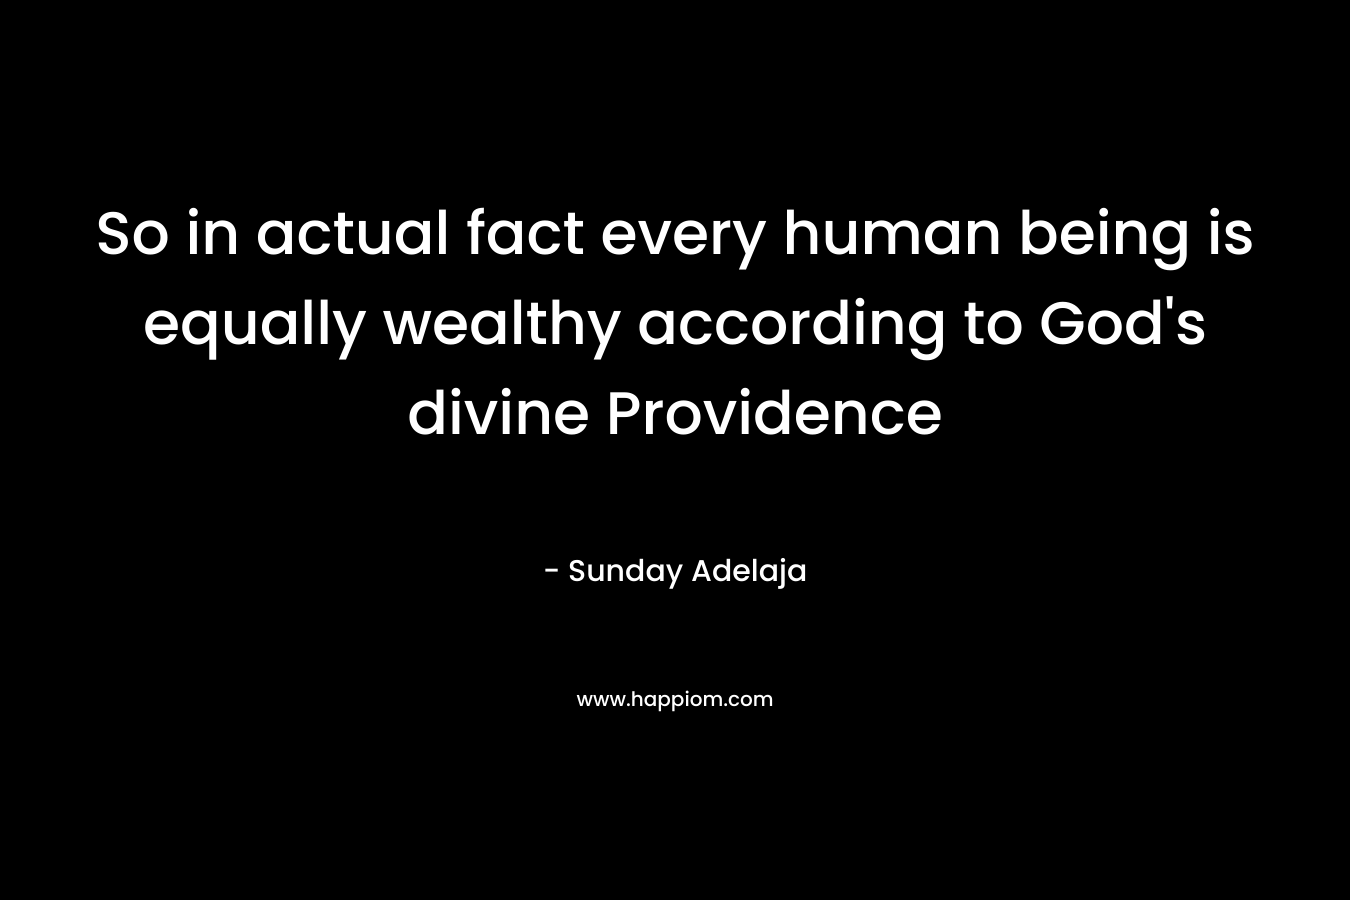 So in actual fact every human being is equally wealthy according to God's divine Providence